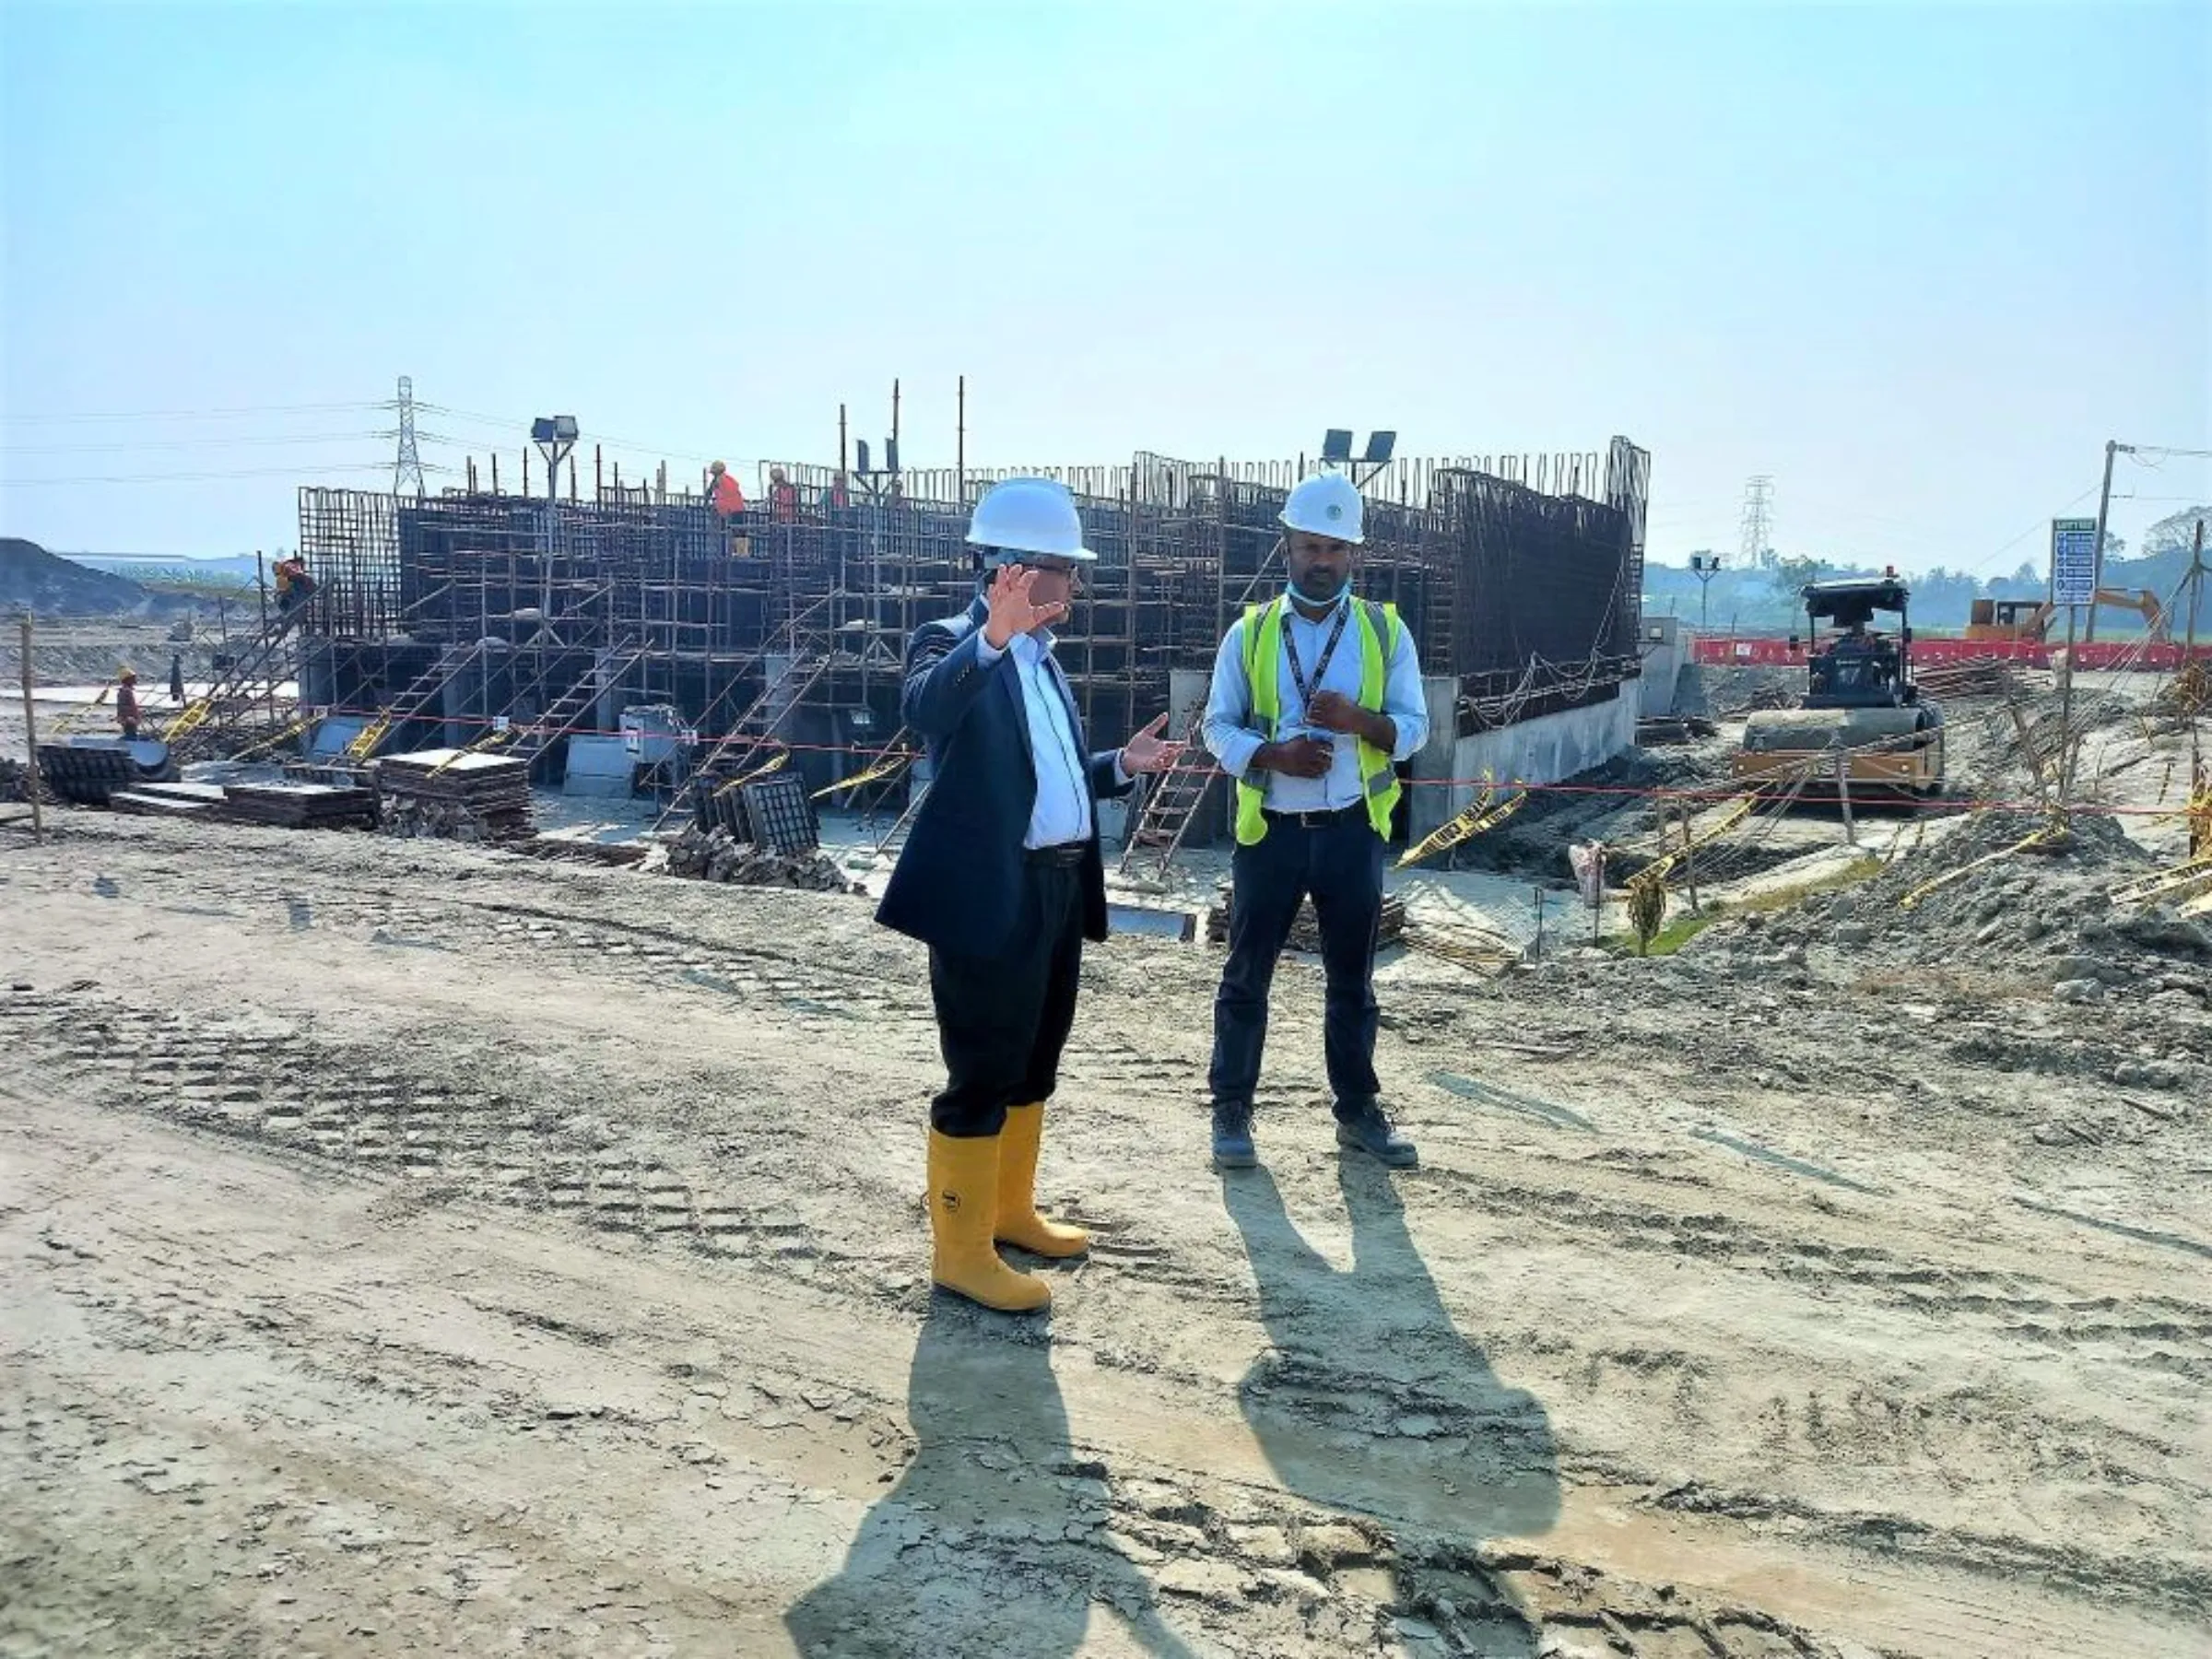 Saleh Ahmed, project director for the Japanese economic zone, talking to a technician at the construction site, Narayanganj, Bangladesh, January 11, 2023, Thomson Reuters Foundation/ Md. Tahmid Zami